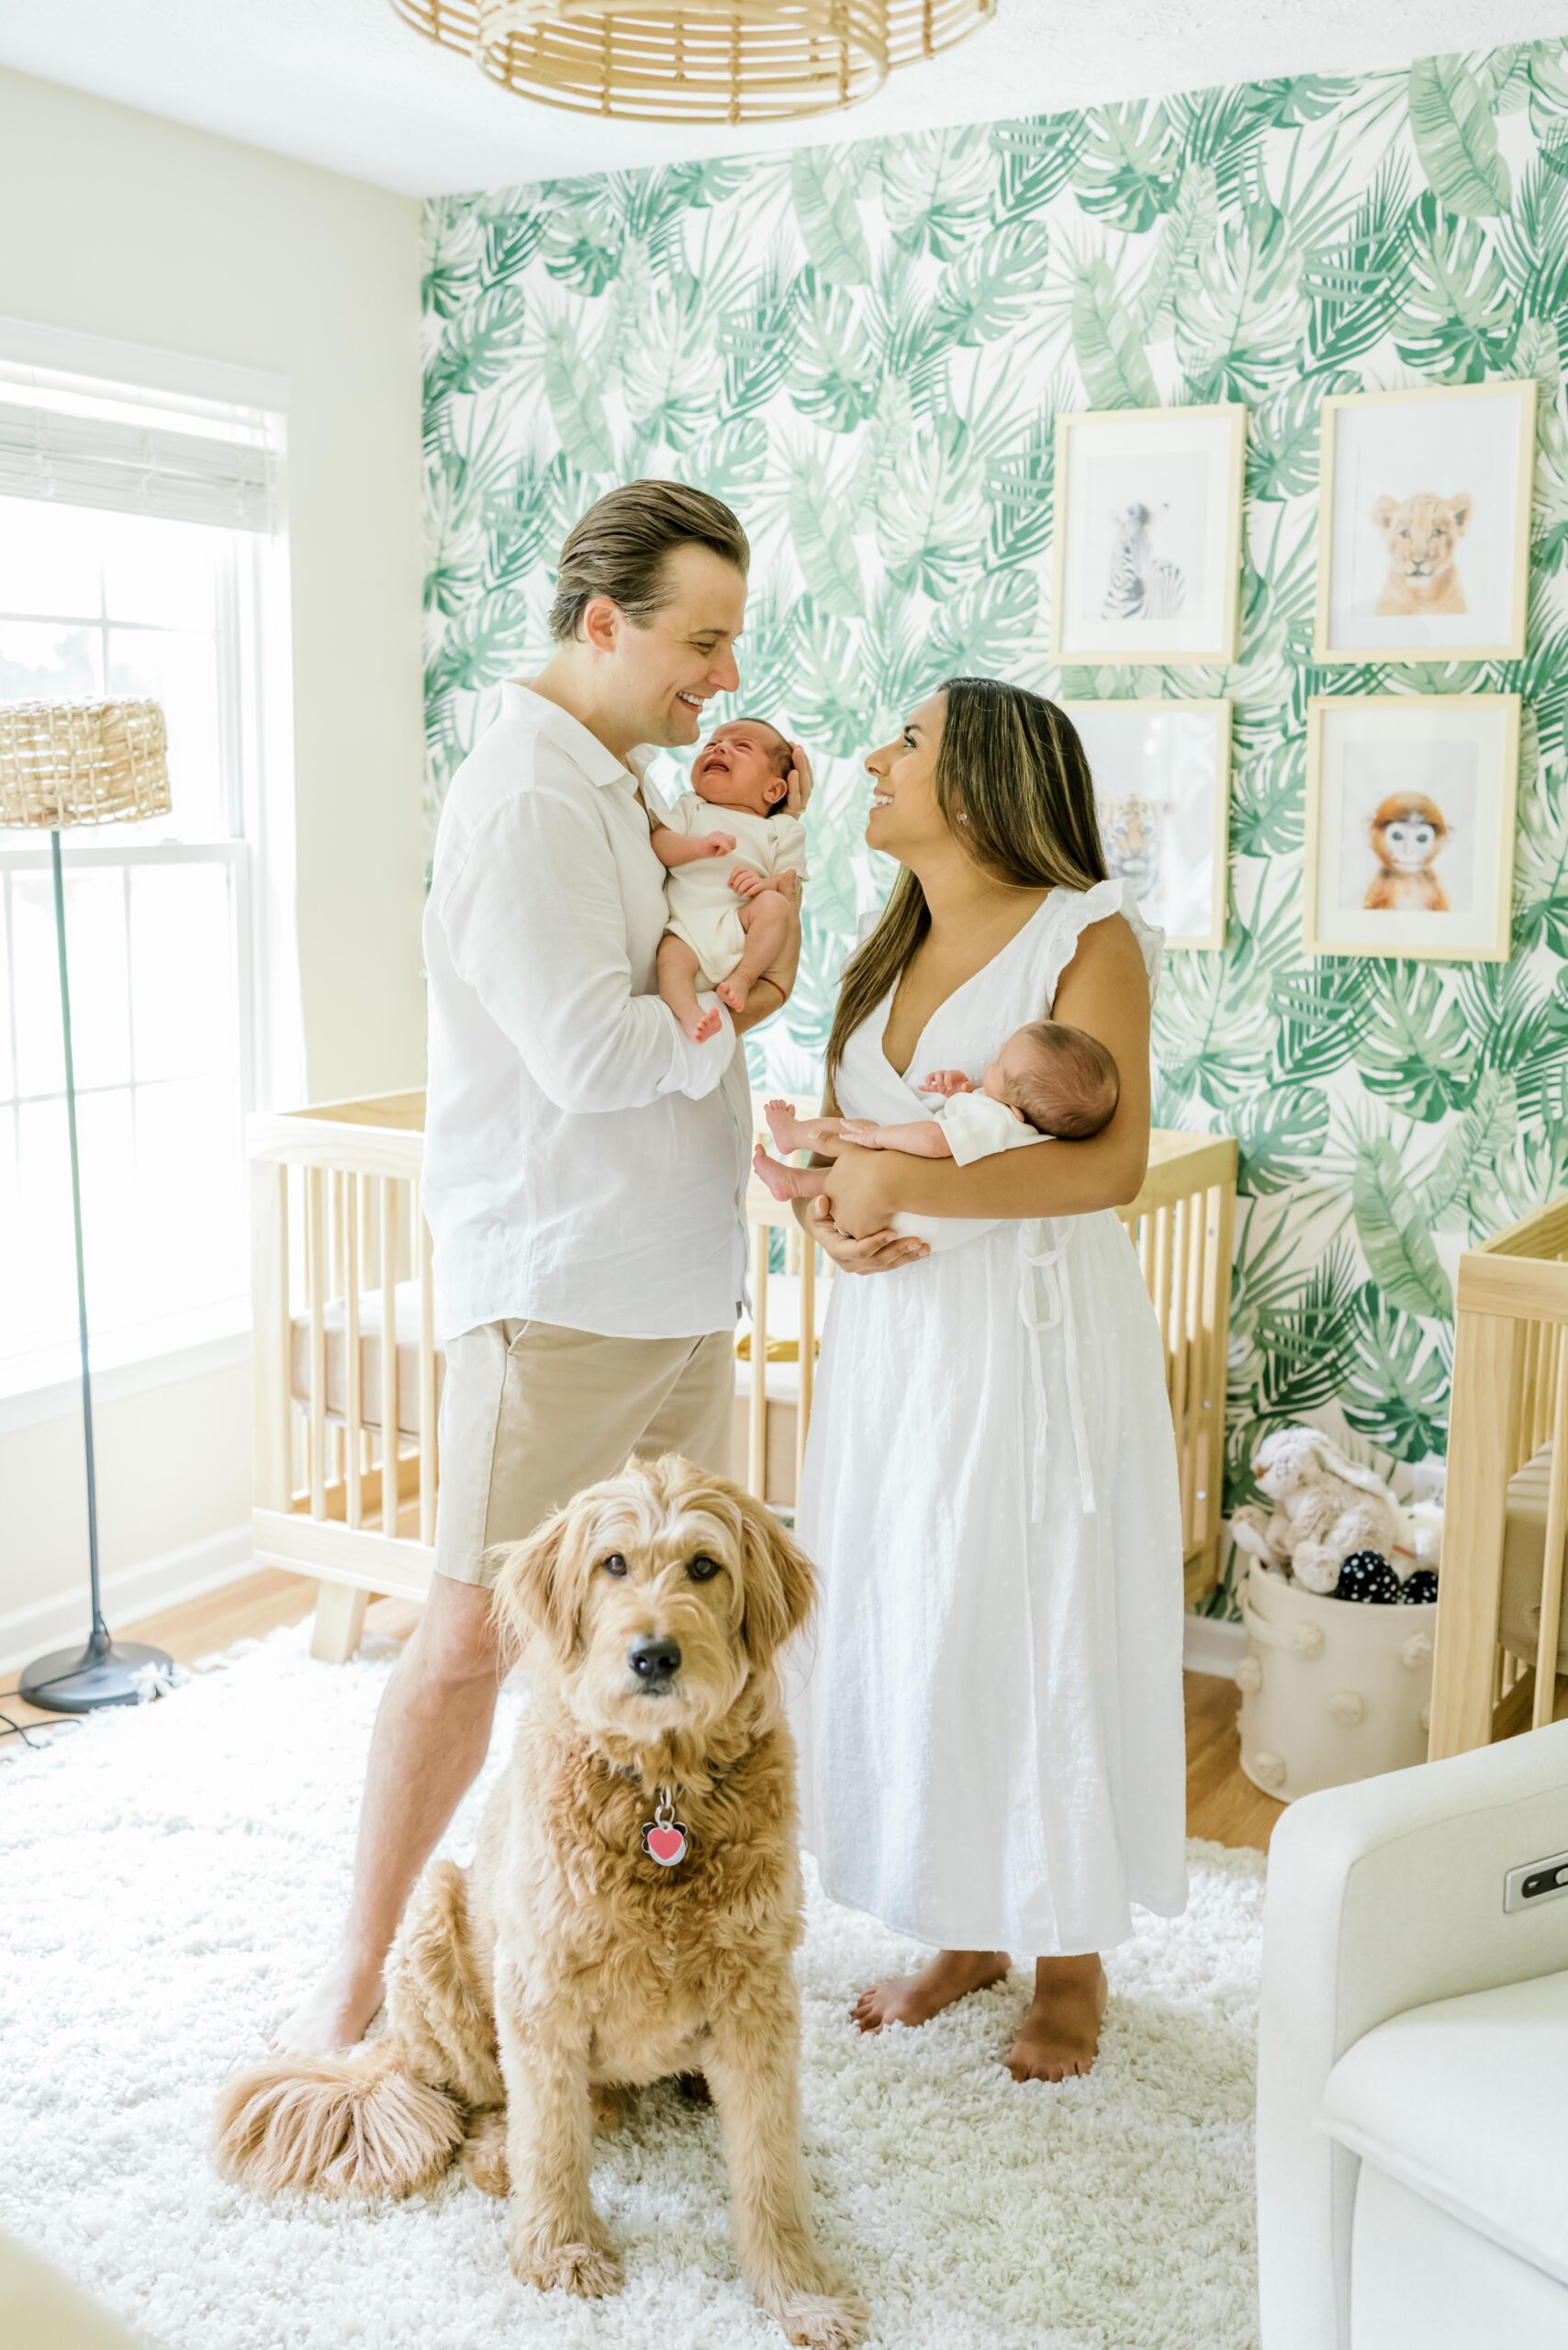 Mom and dad hold newborn twins during newborn photography session